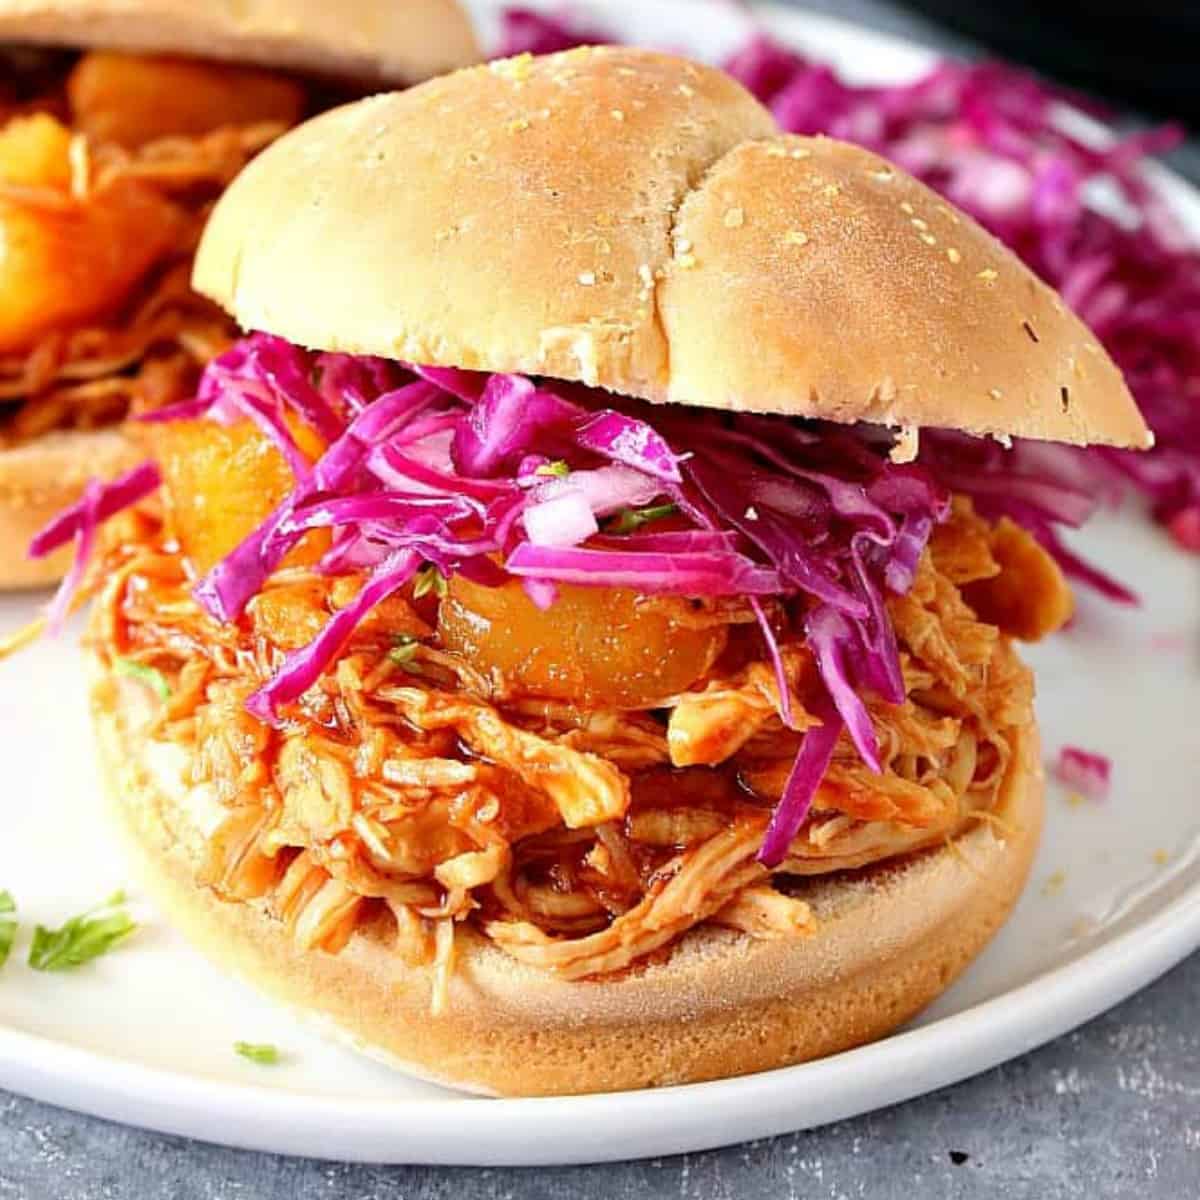 Pulled barbecue chicken in a bun on a plate.